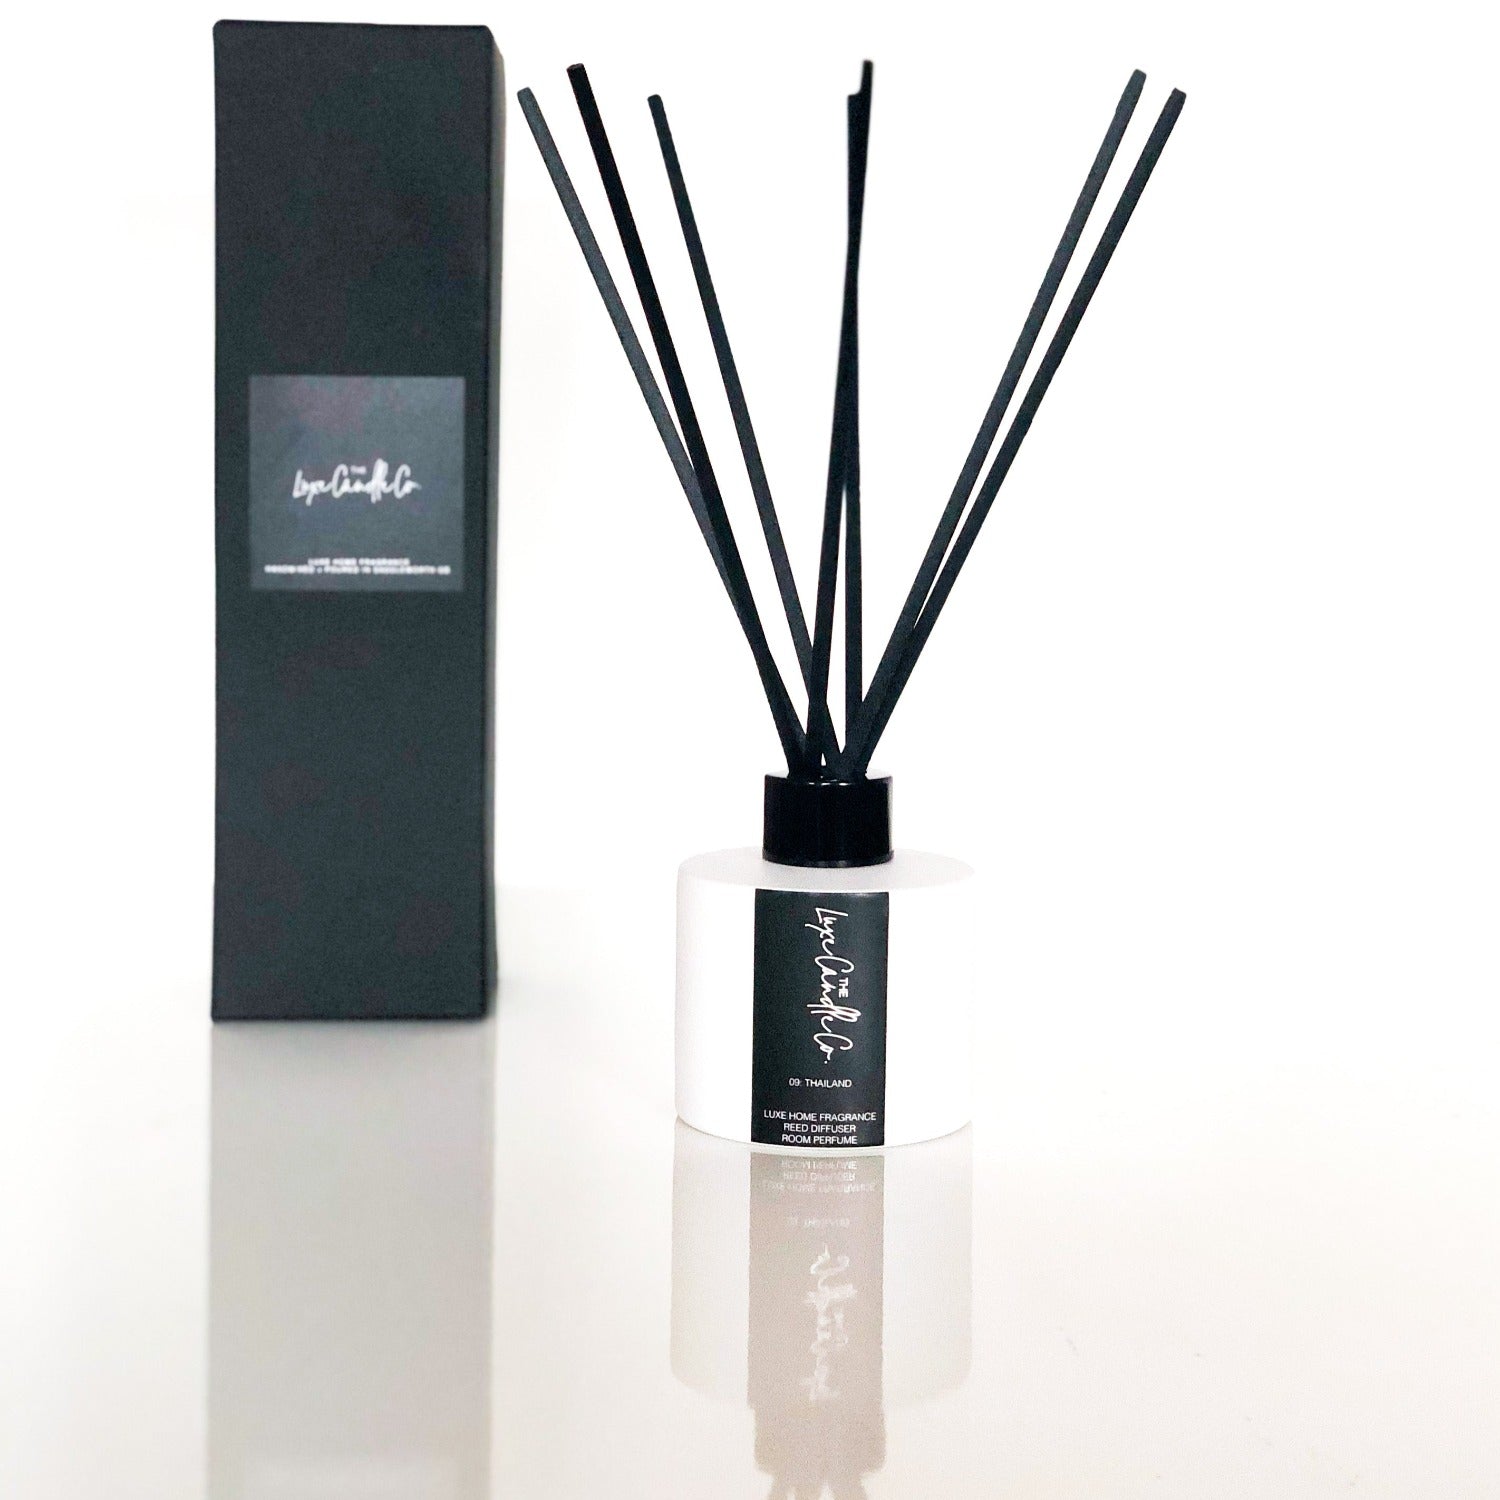 Black & White reed room fragrance diffuser for black and white interiors stylish homes